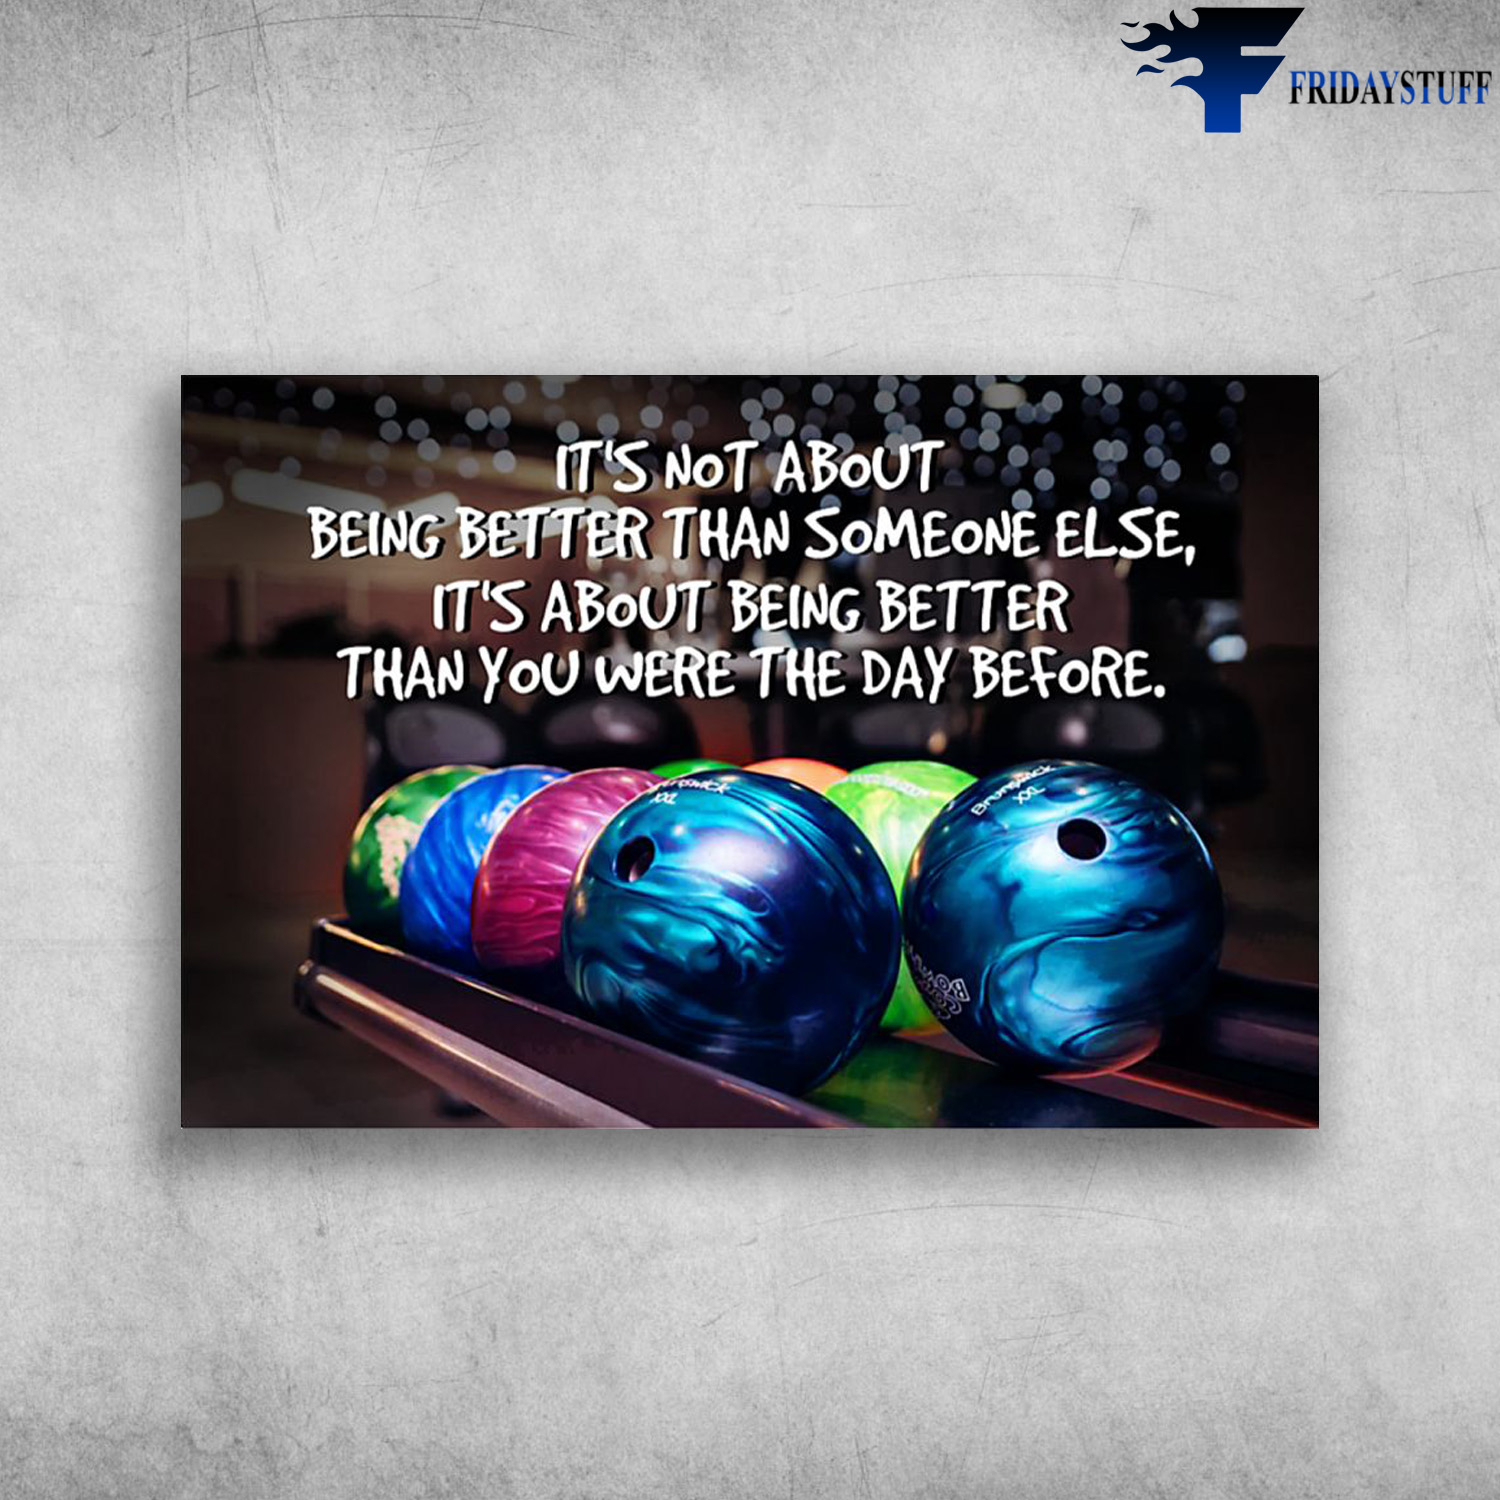 Bowling Ball - It's Not About Being Better Than Someone Else, It's About Being Better Than You Were The Day Before